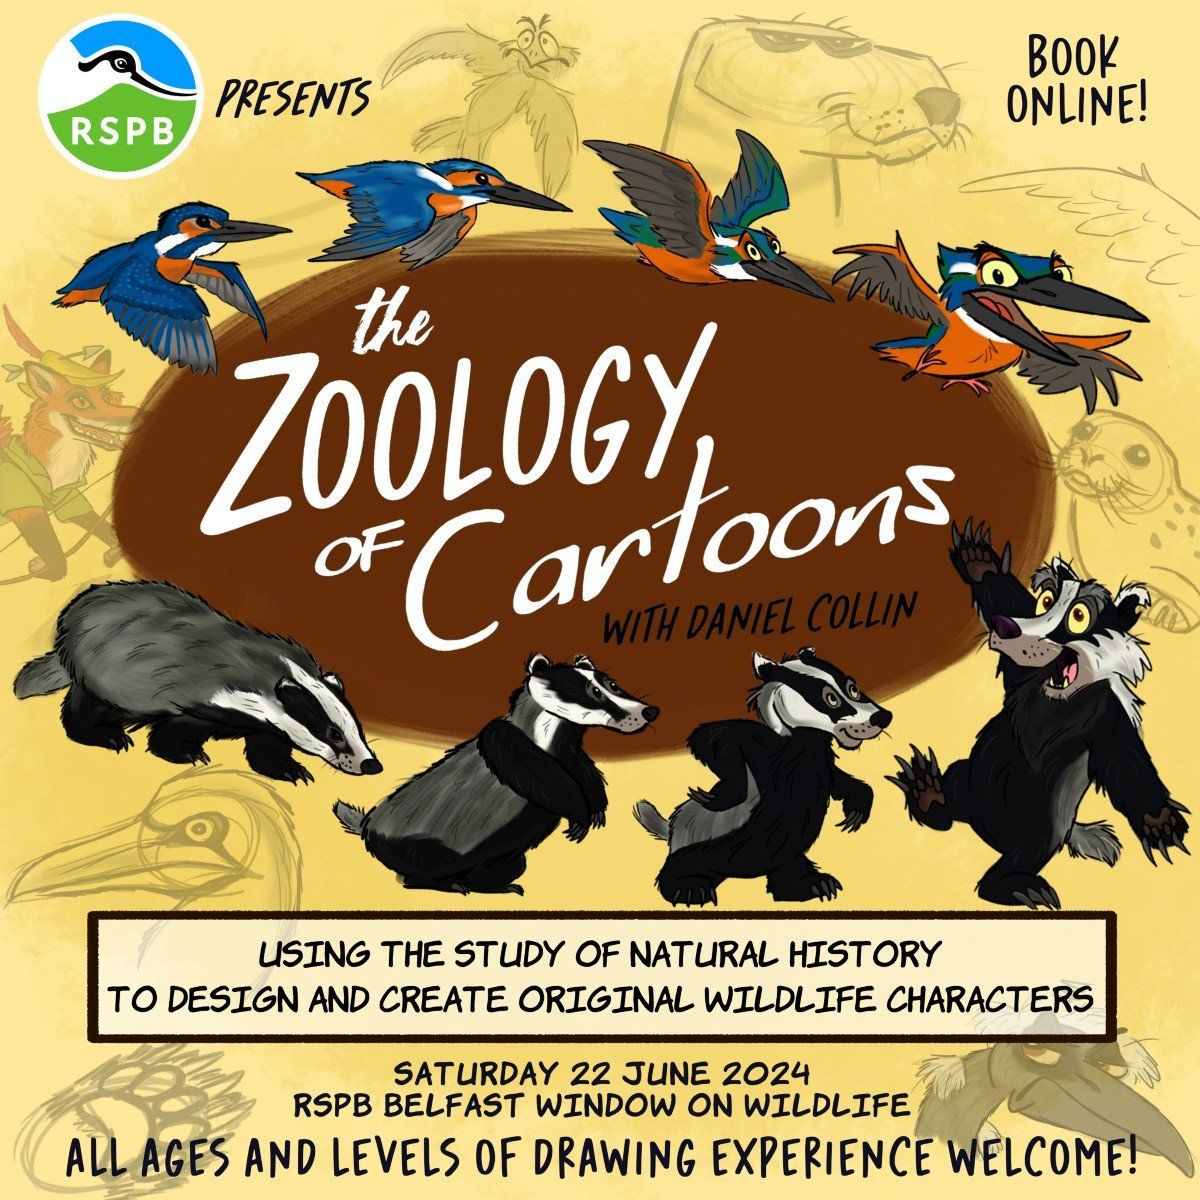 The Zoology of Cartoons - Rescheduled to 27 July